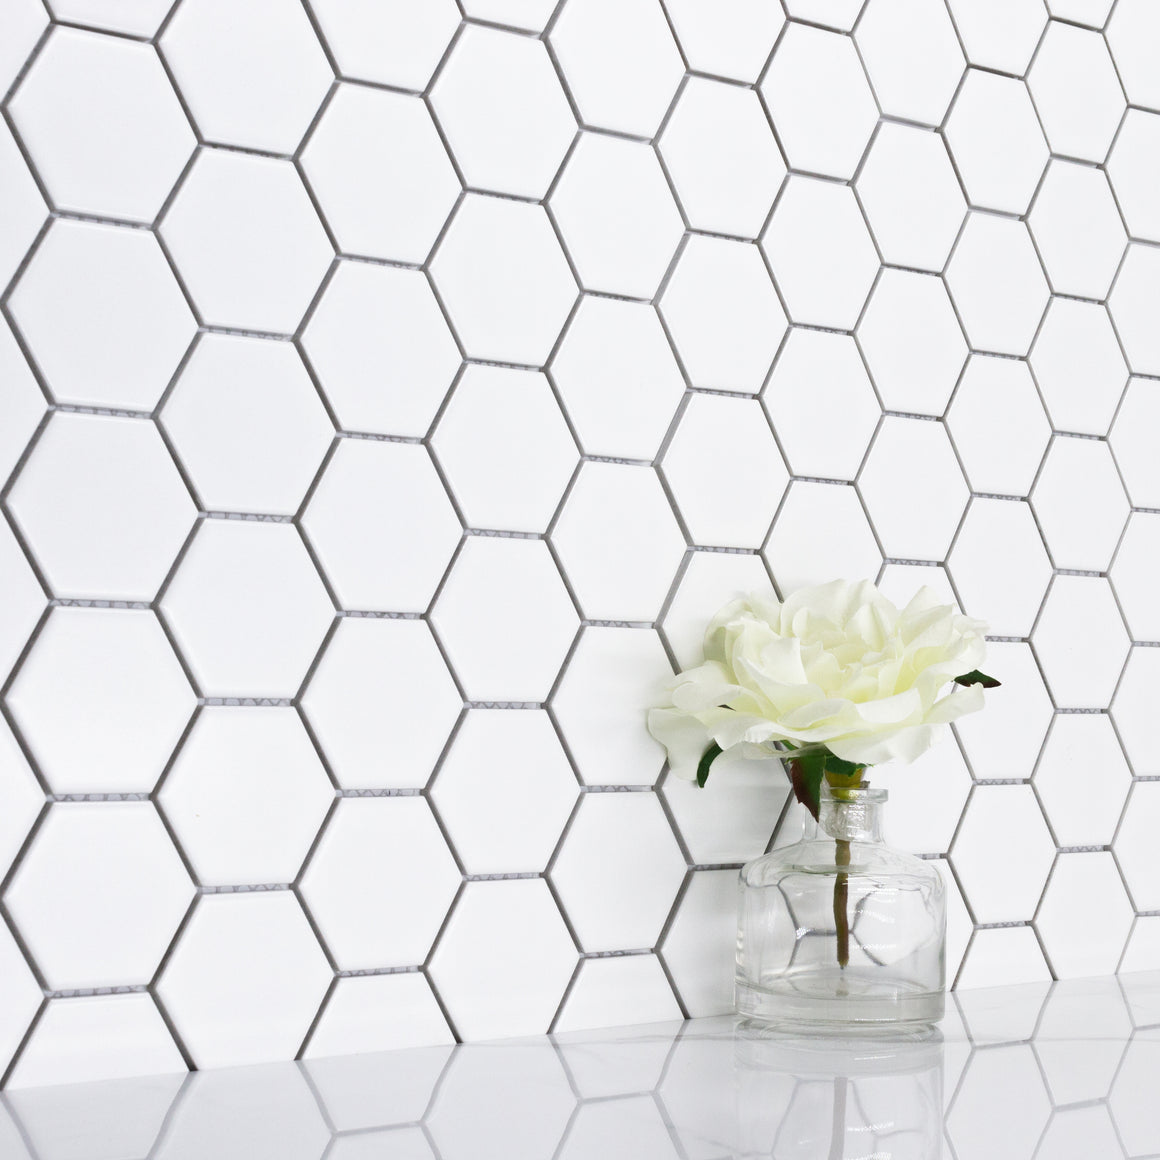 Hexa-Dot 2" Hexagon White bold matte porcelain mosaic for residential and commercial bathroom and kitchen floor and wall imported from China, Anatolia available from TilesInspired Canada's Online Tile Store delivering across Ontario and Quebec, including Toronto, Montreal, Ottawa, London, Windsor, Kitchener, Muskoka, Barrie, Kingston, Hamilton, and Niagara decoration idea